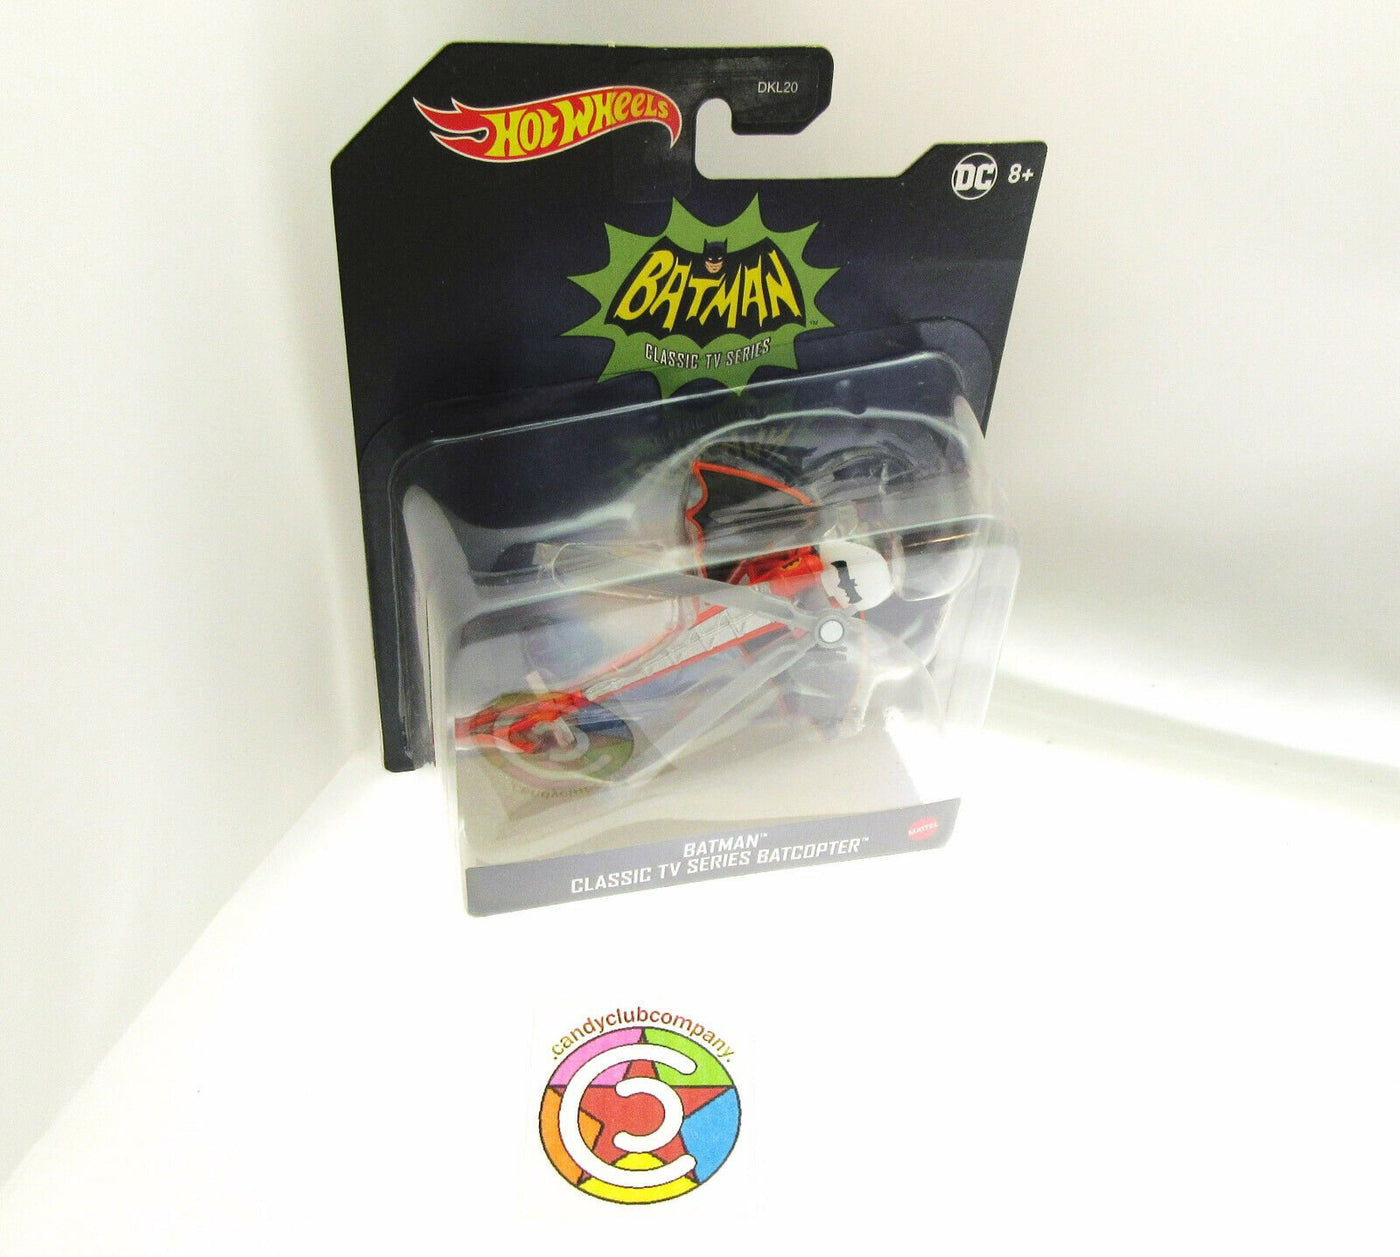 Batcopter ~ Batman Diecast Helicopter ~ Classic TV series ~ Hot Wheels